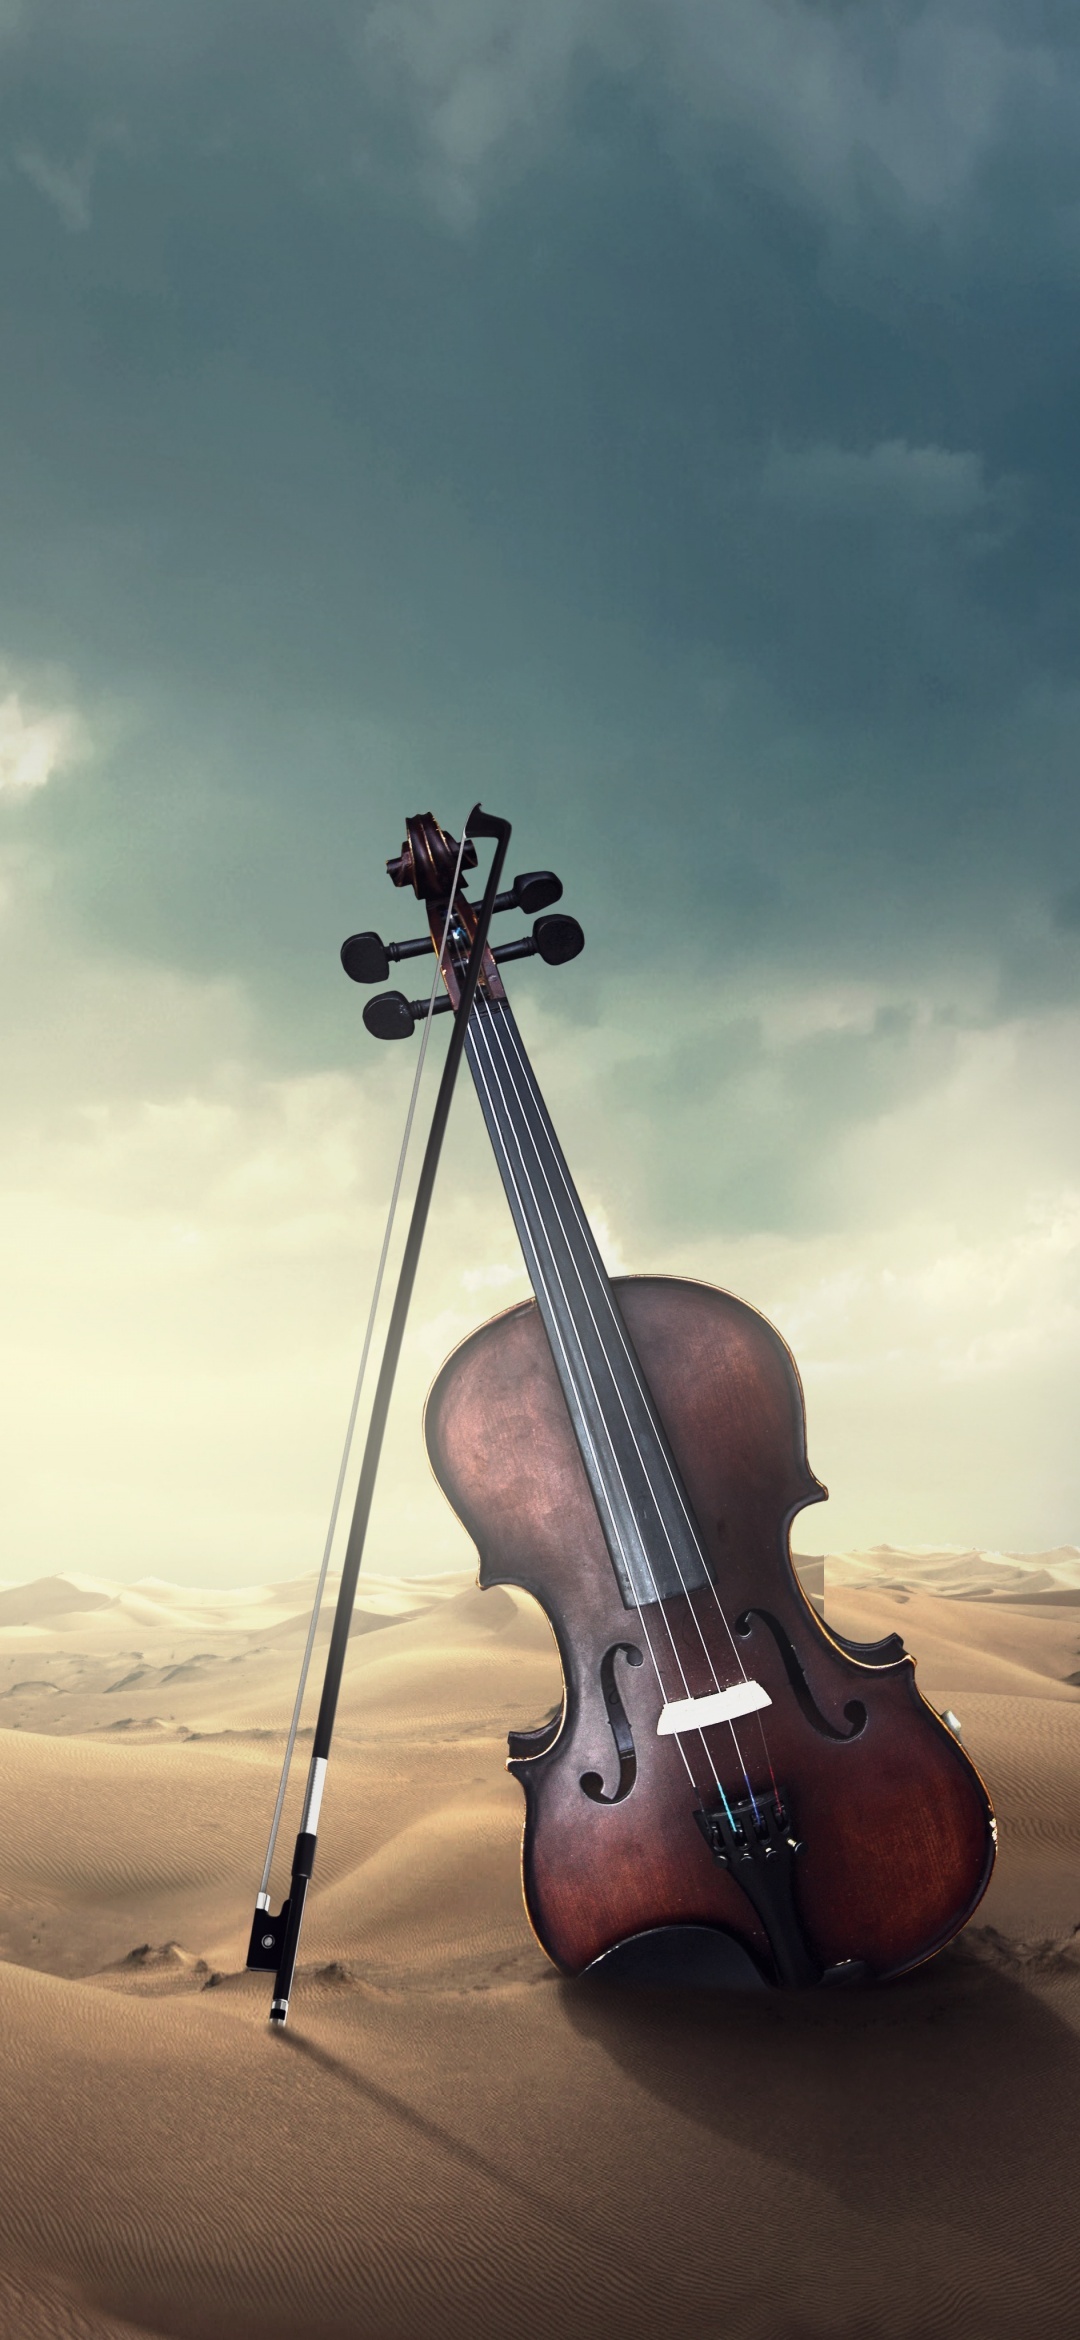 Violin: Vintage Instrument, French Bow, Wooden Musical Instrument. 1080x2340 HD Wallpaper.